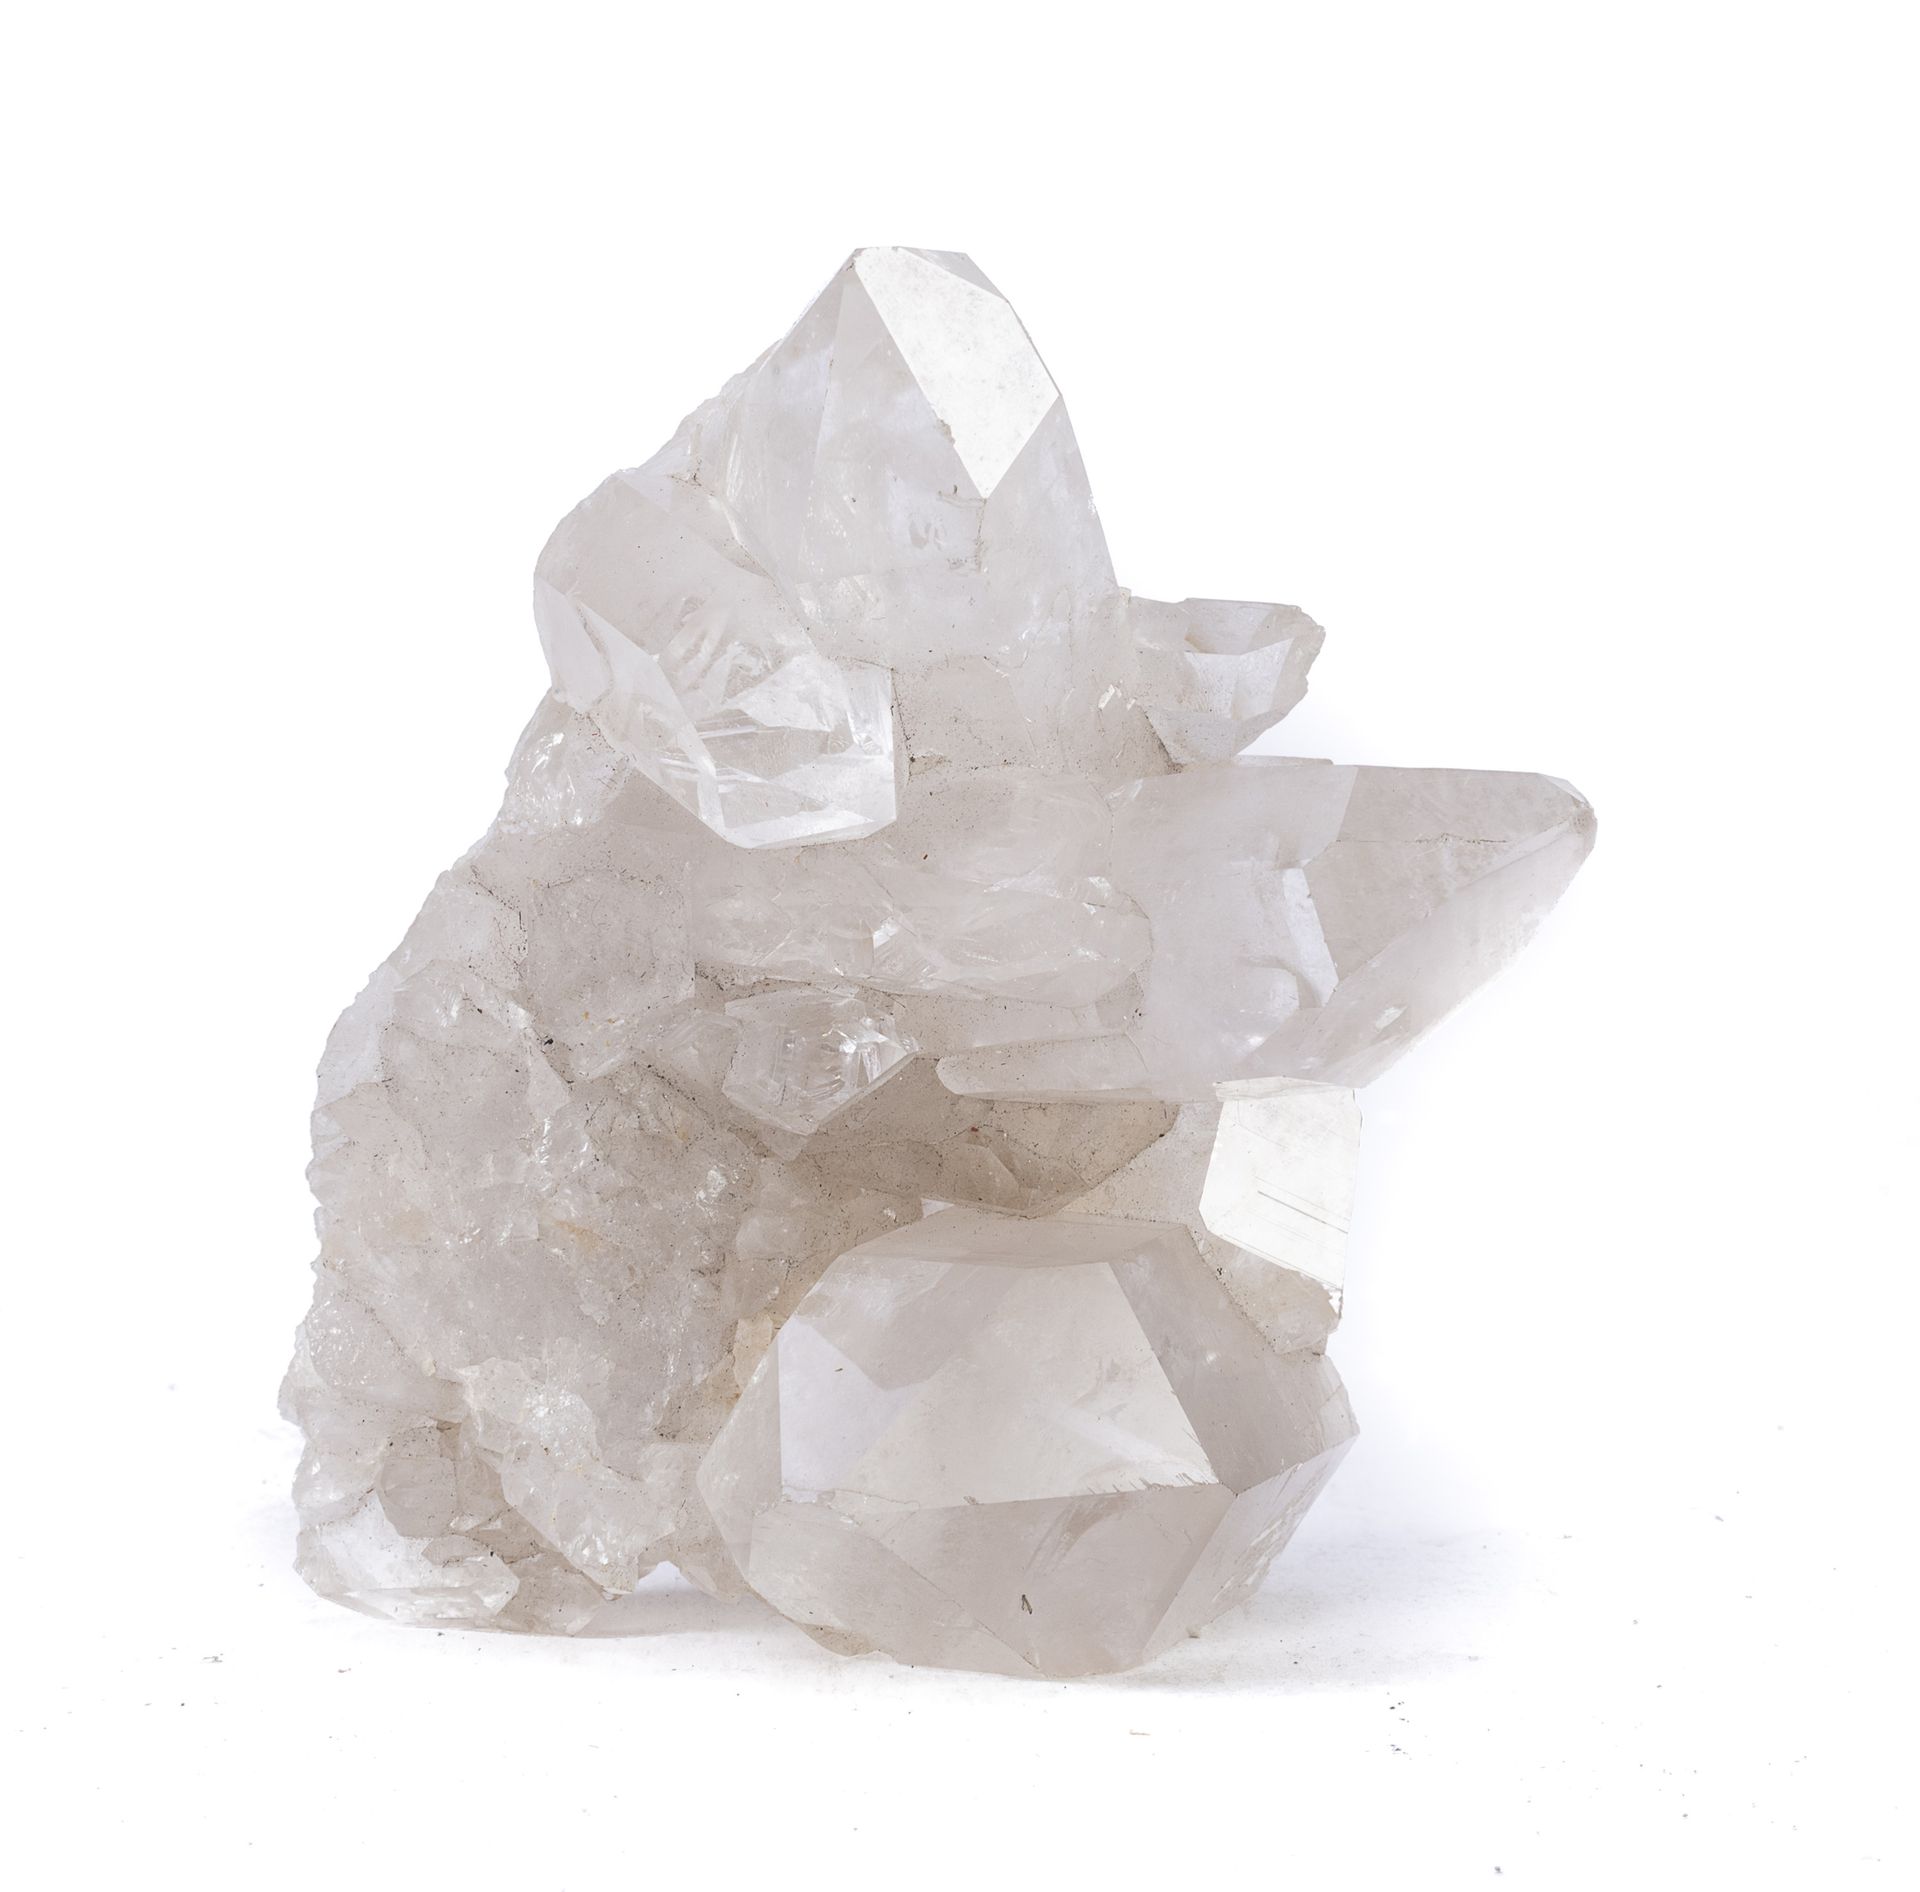 Null FRAGMENT OF ROCK CRYSTAL, PERIOD NOT DEFINABLE